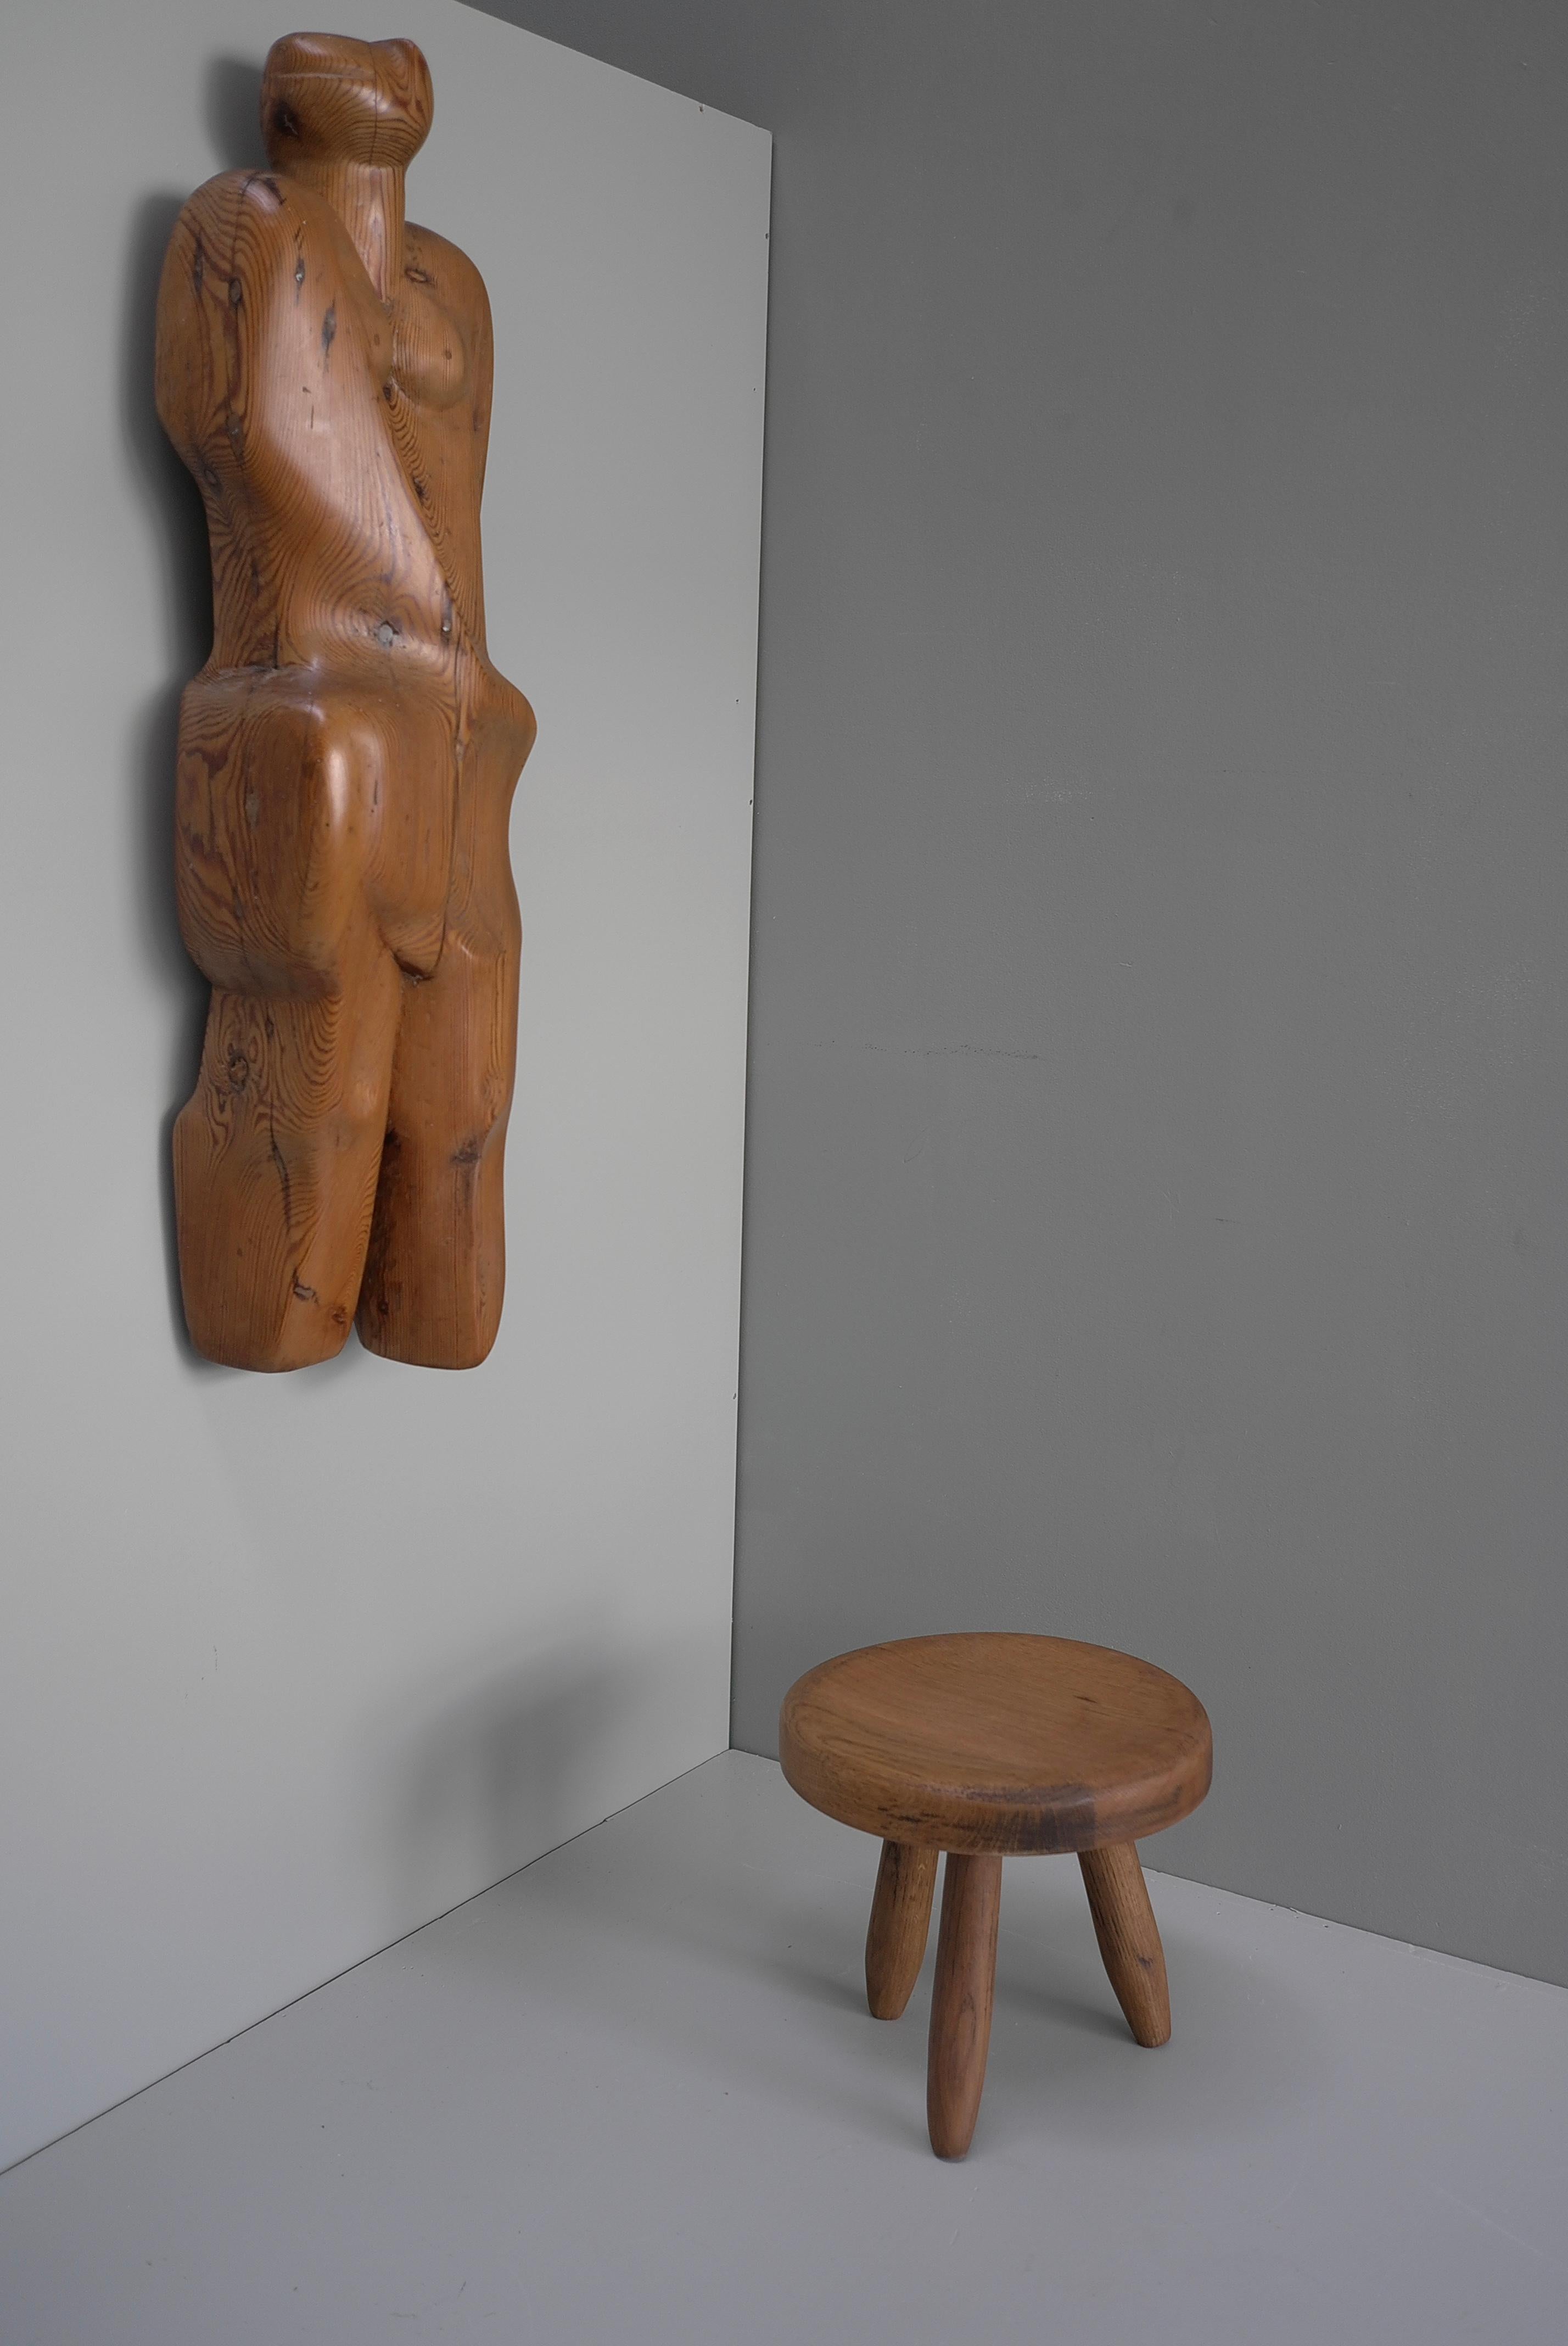 Abstract Wooden Wall Art , Women Figure by Cor Dam The Netherlands Delft 1958

About Cor Dam
Cor Dam (Delft, April 26, 1935 – July 29, 2019) trained at the Royal Academy of Art in The Hague and the T.U. in Delft, design of sculpting techniques. From